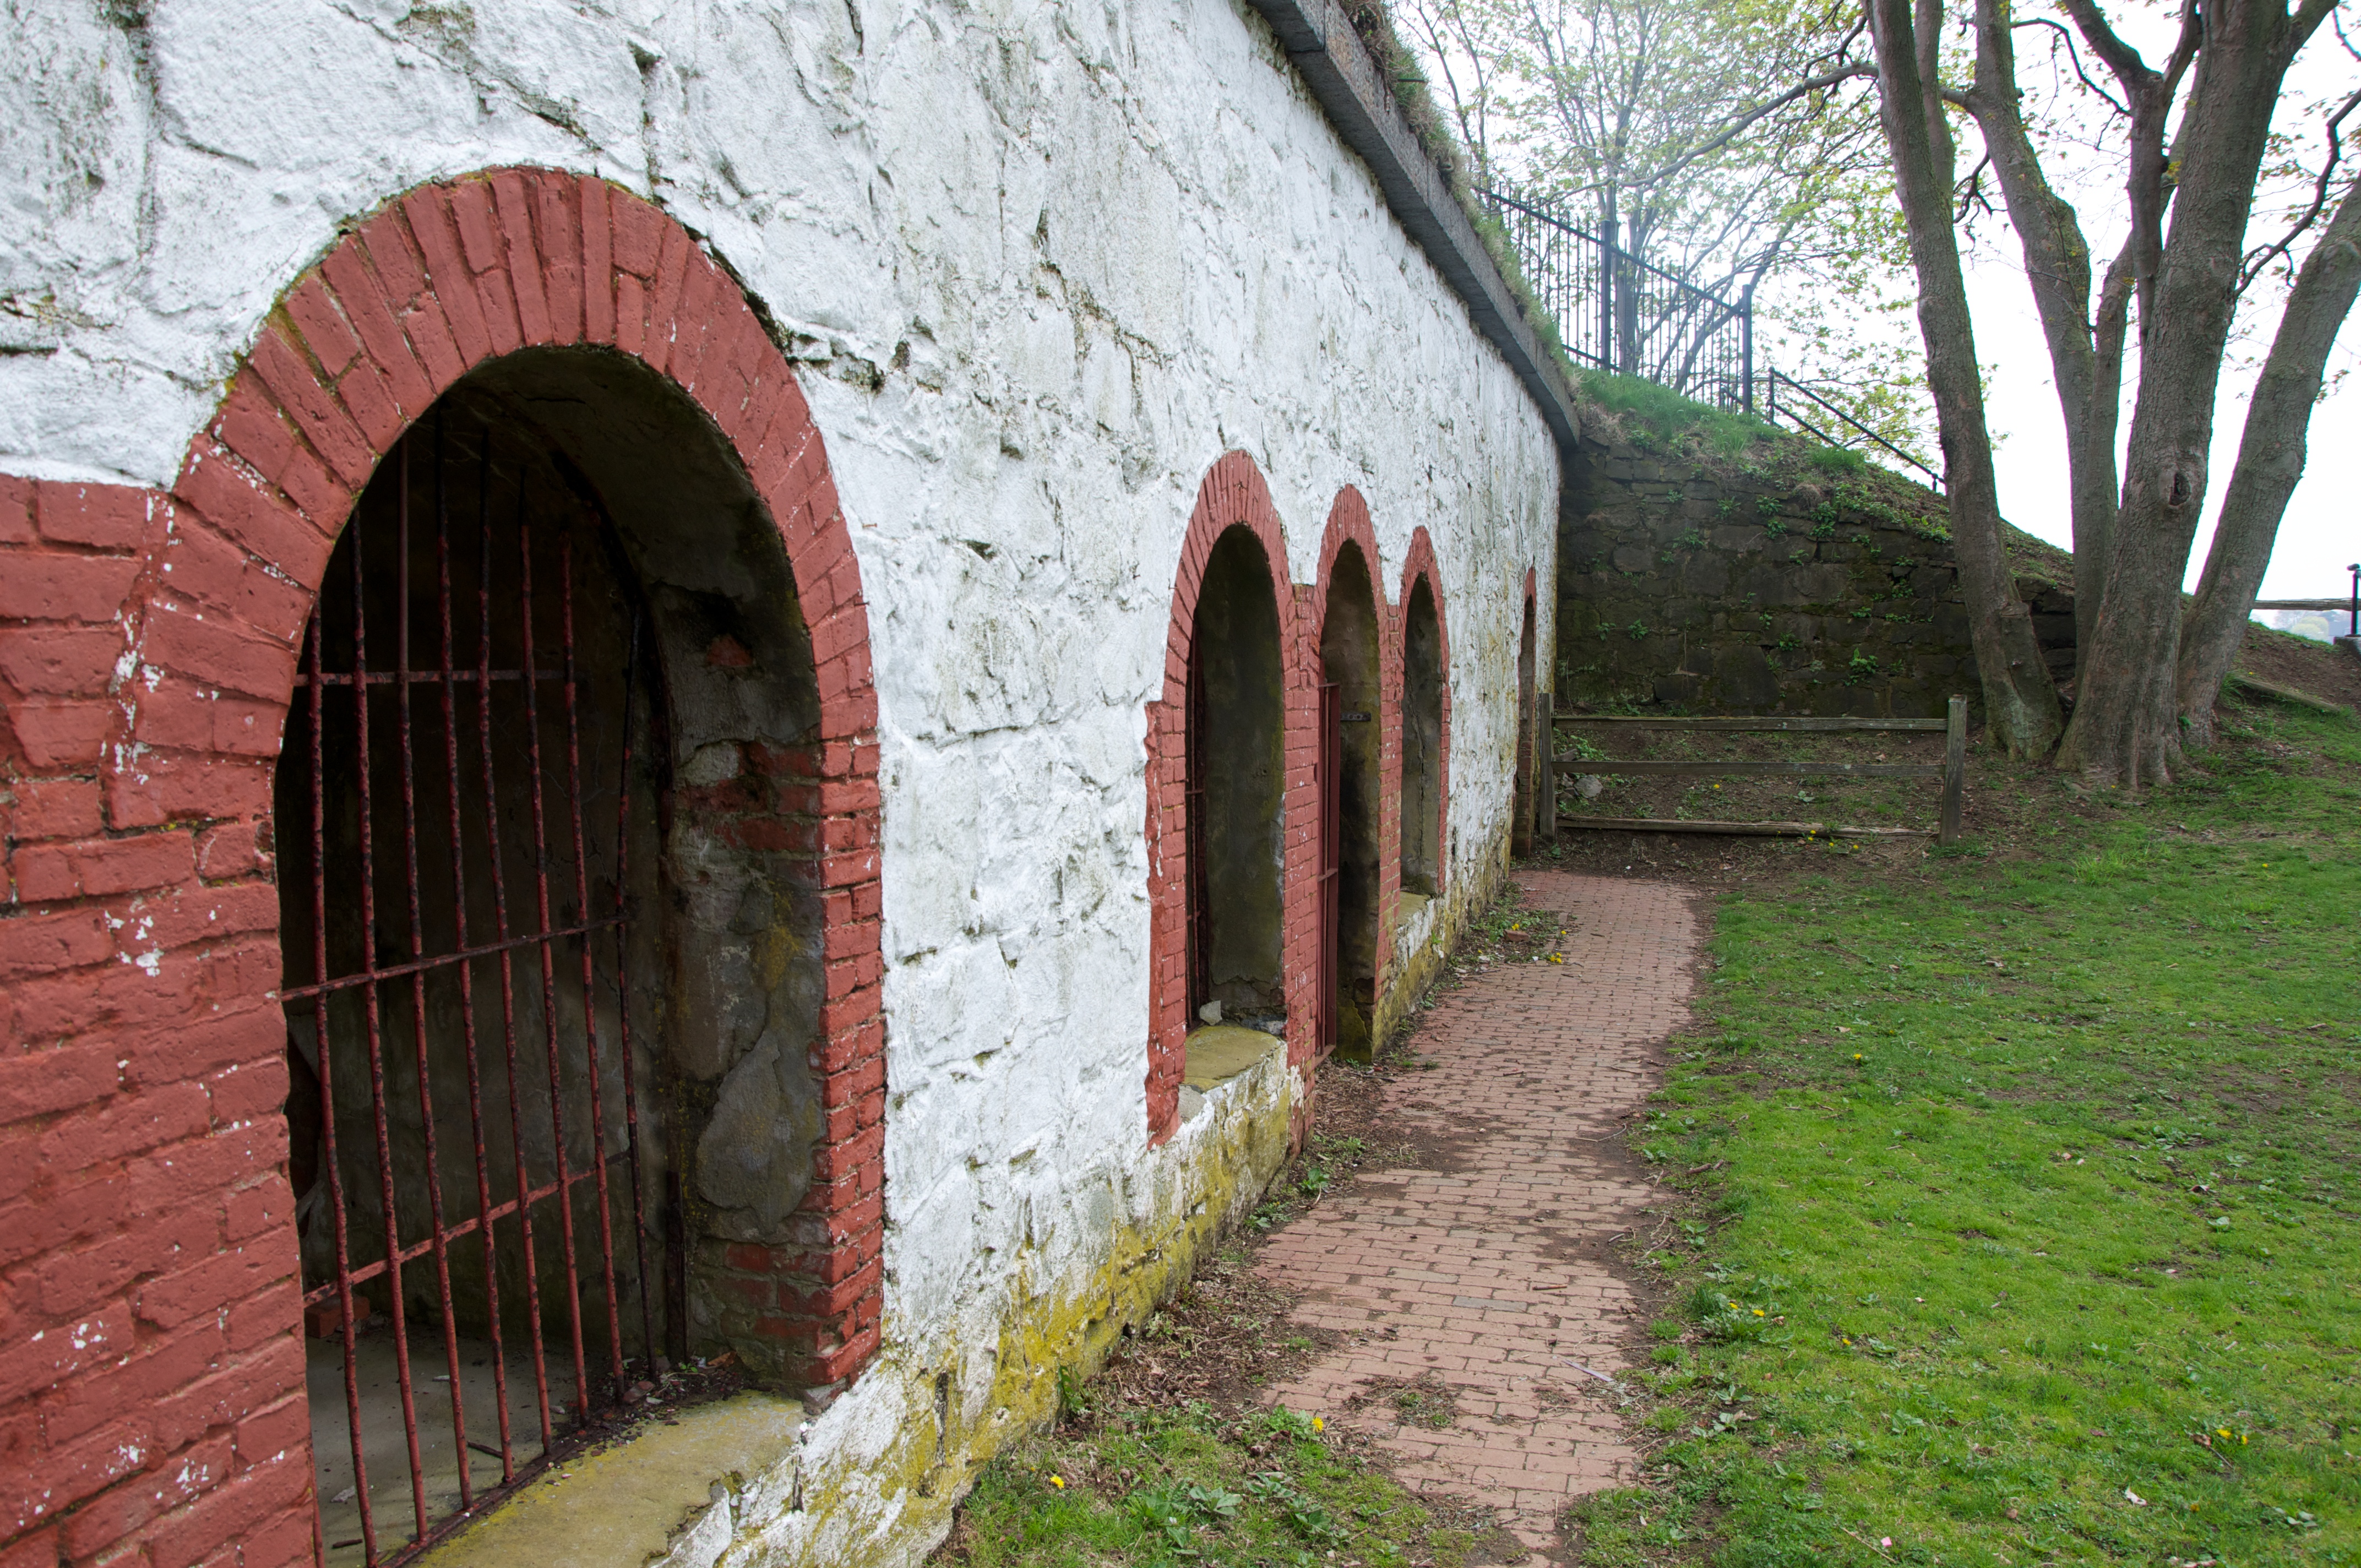 Fort Sewall: The colonial age fort once guarding Marblehead - Boston